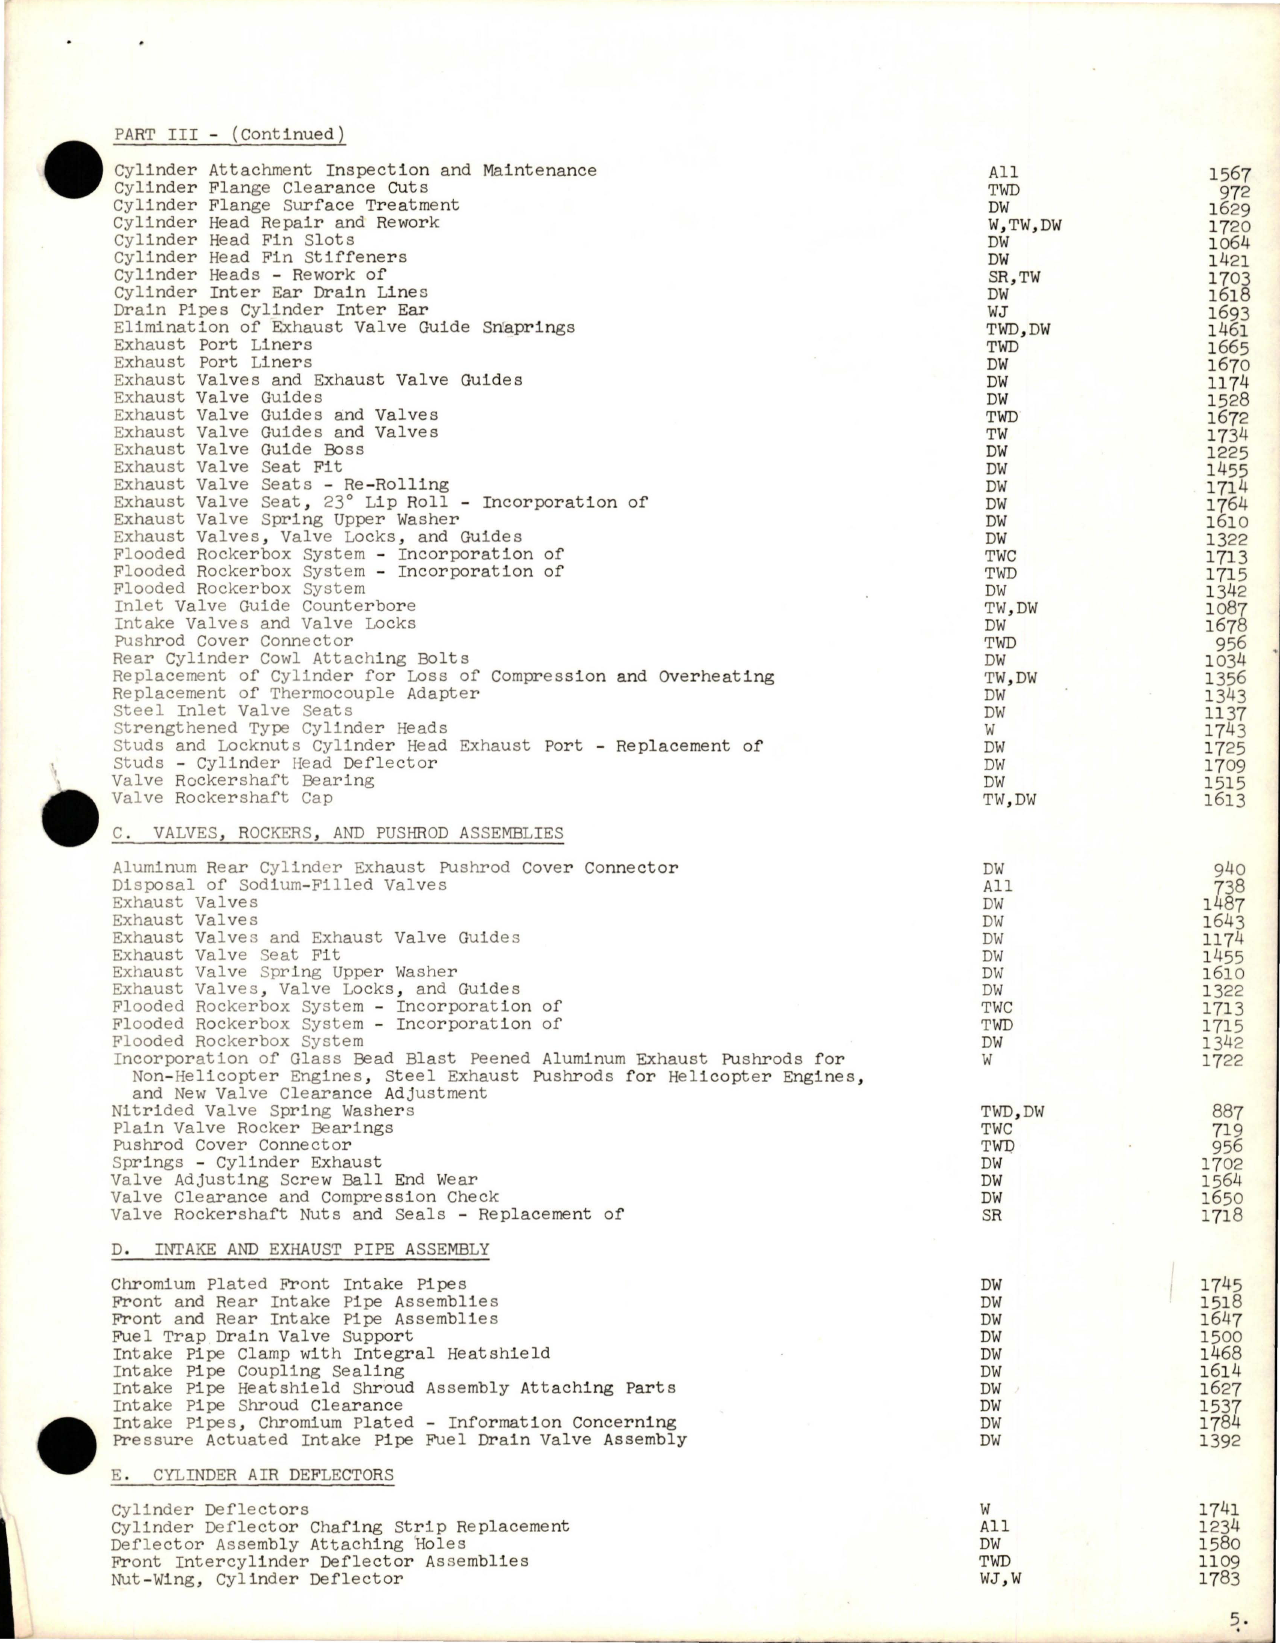 Sample page 5 from AirCorps Library document: Alphabetical and Numerical Listing for Pratt & Whitney Reciprocating Engine